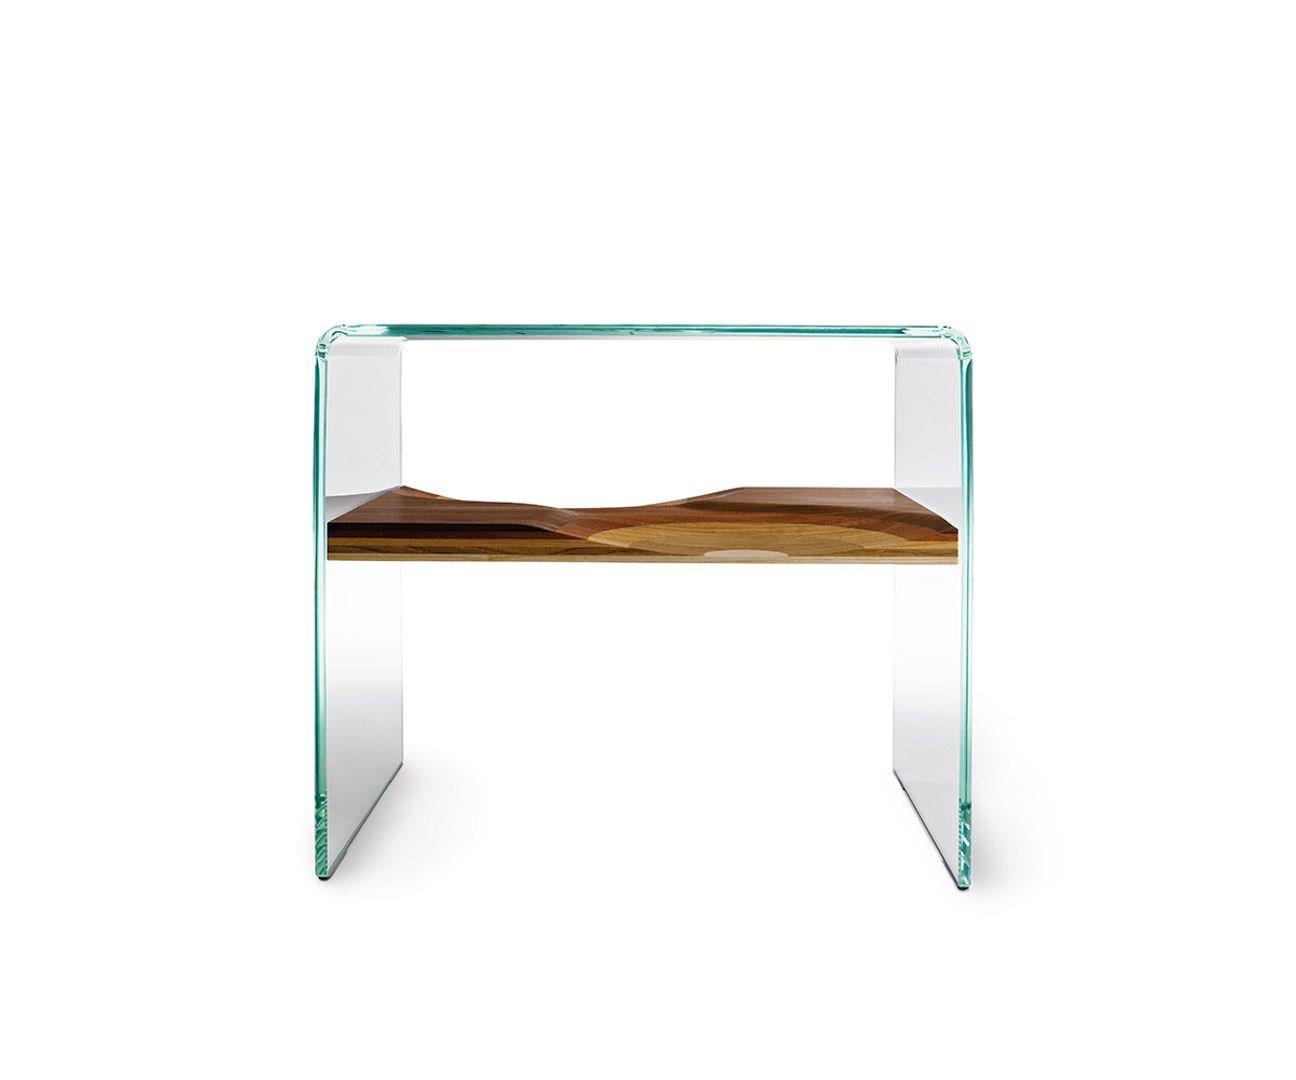 In Bifronte side table, a shelf made of five different solid woods is framed in a structure of extra clear glass, creating a “trompe l’oeil” effect of mid-air suspension.Curved extra-clear glass structure.Shelf made from plywood using five different